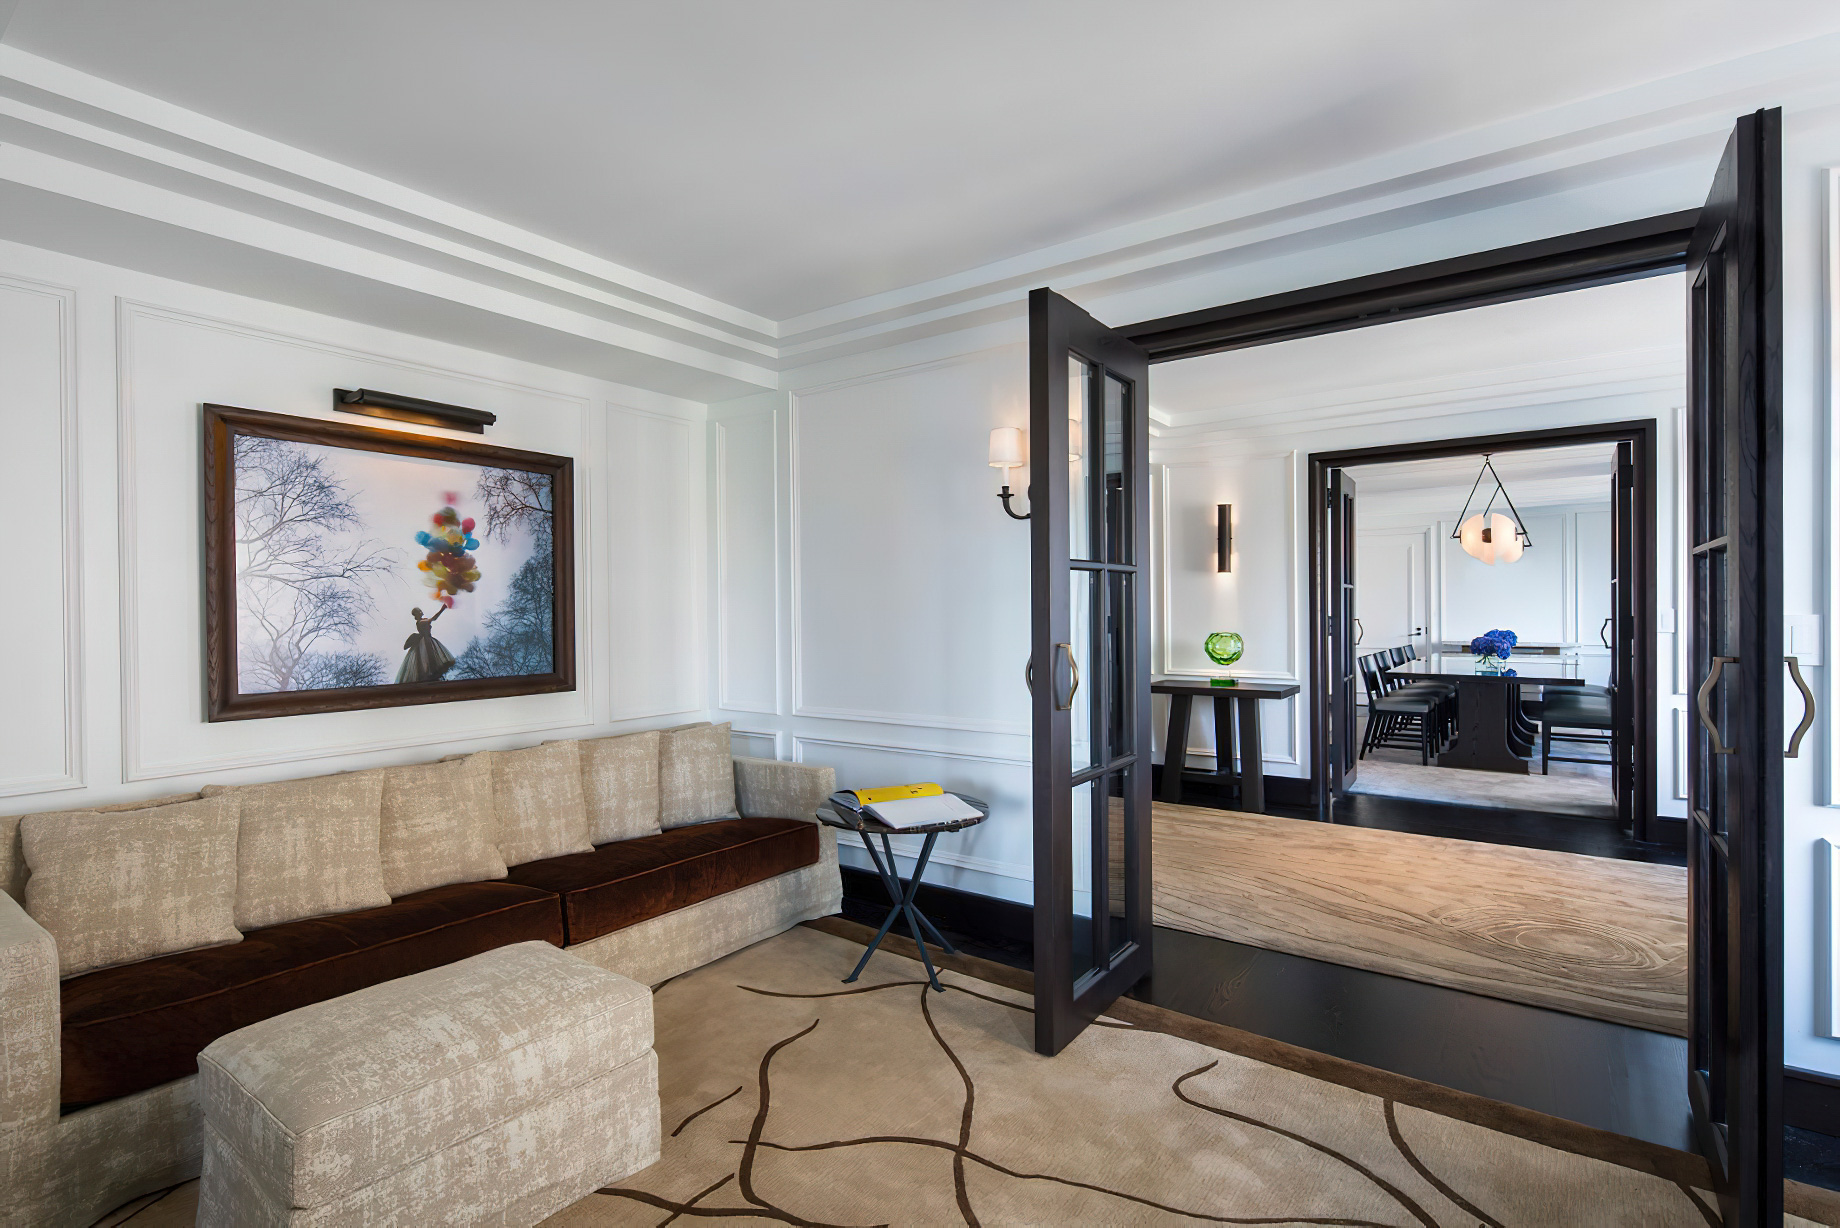 The Ritz-Carlton New York, Central Park Hotel – New York, NY, USA – The Royal Suite Sitting Room